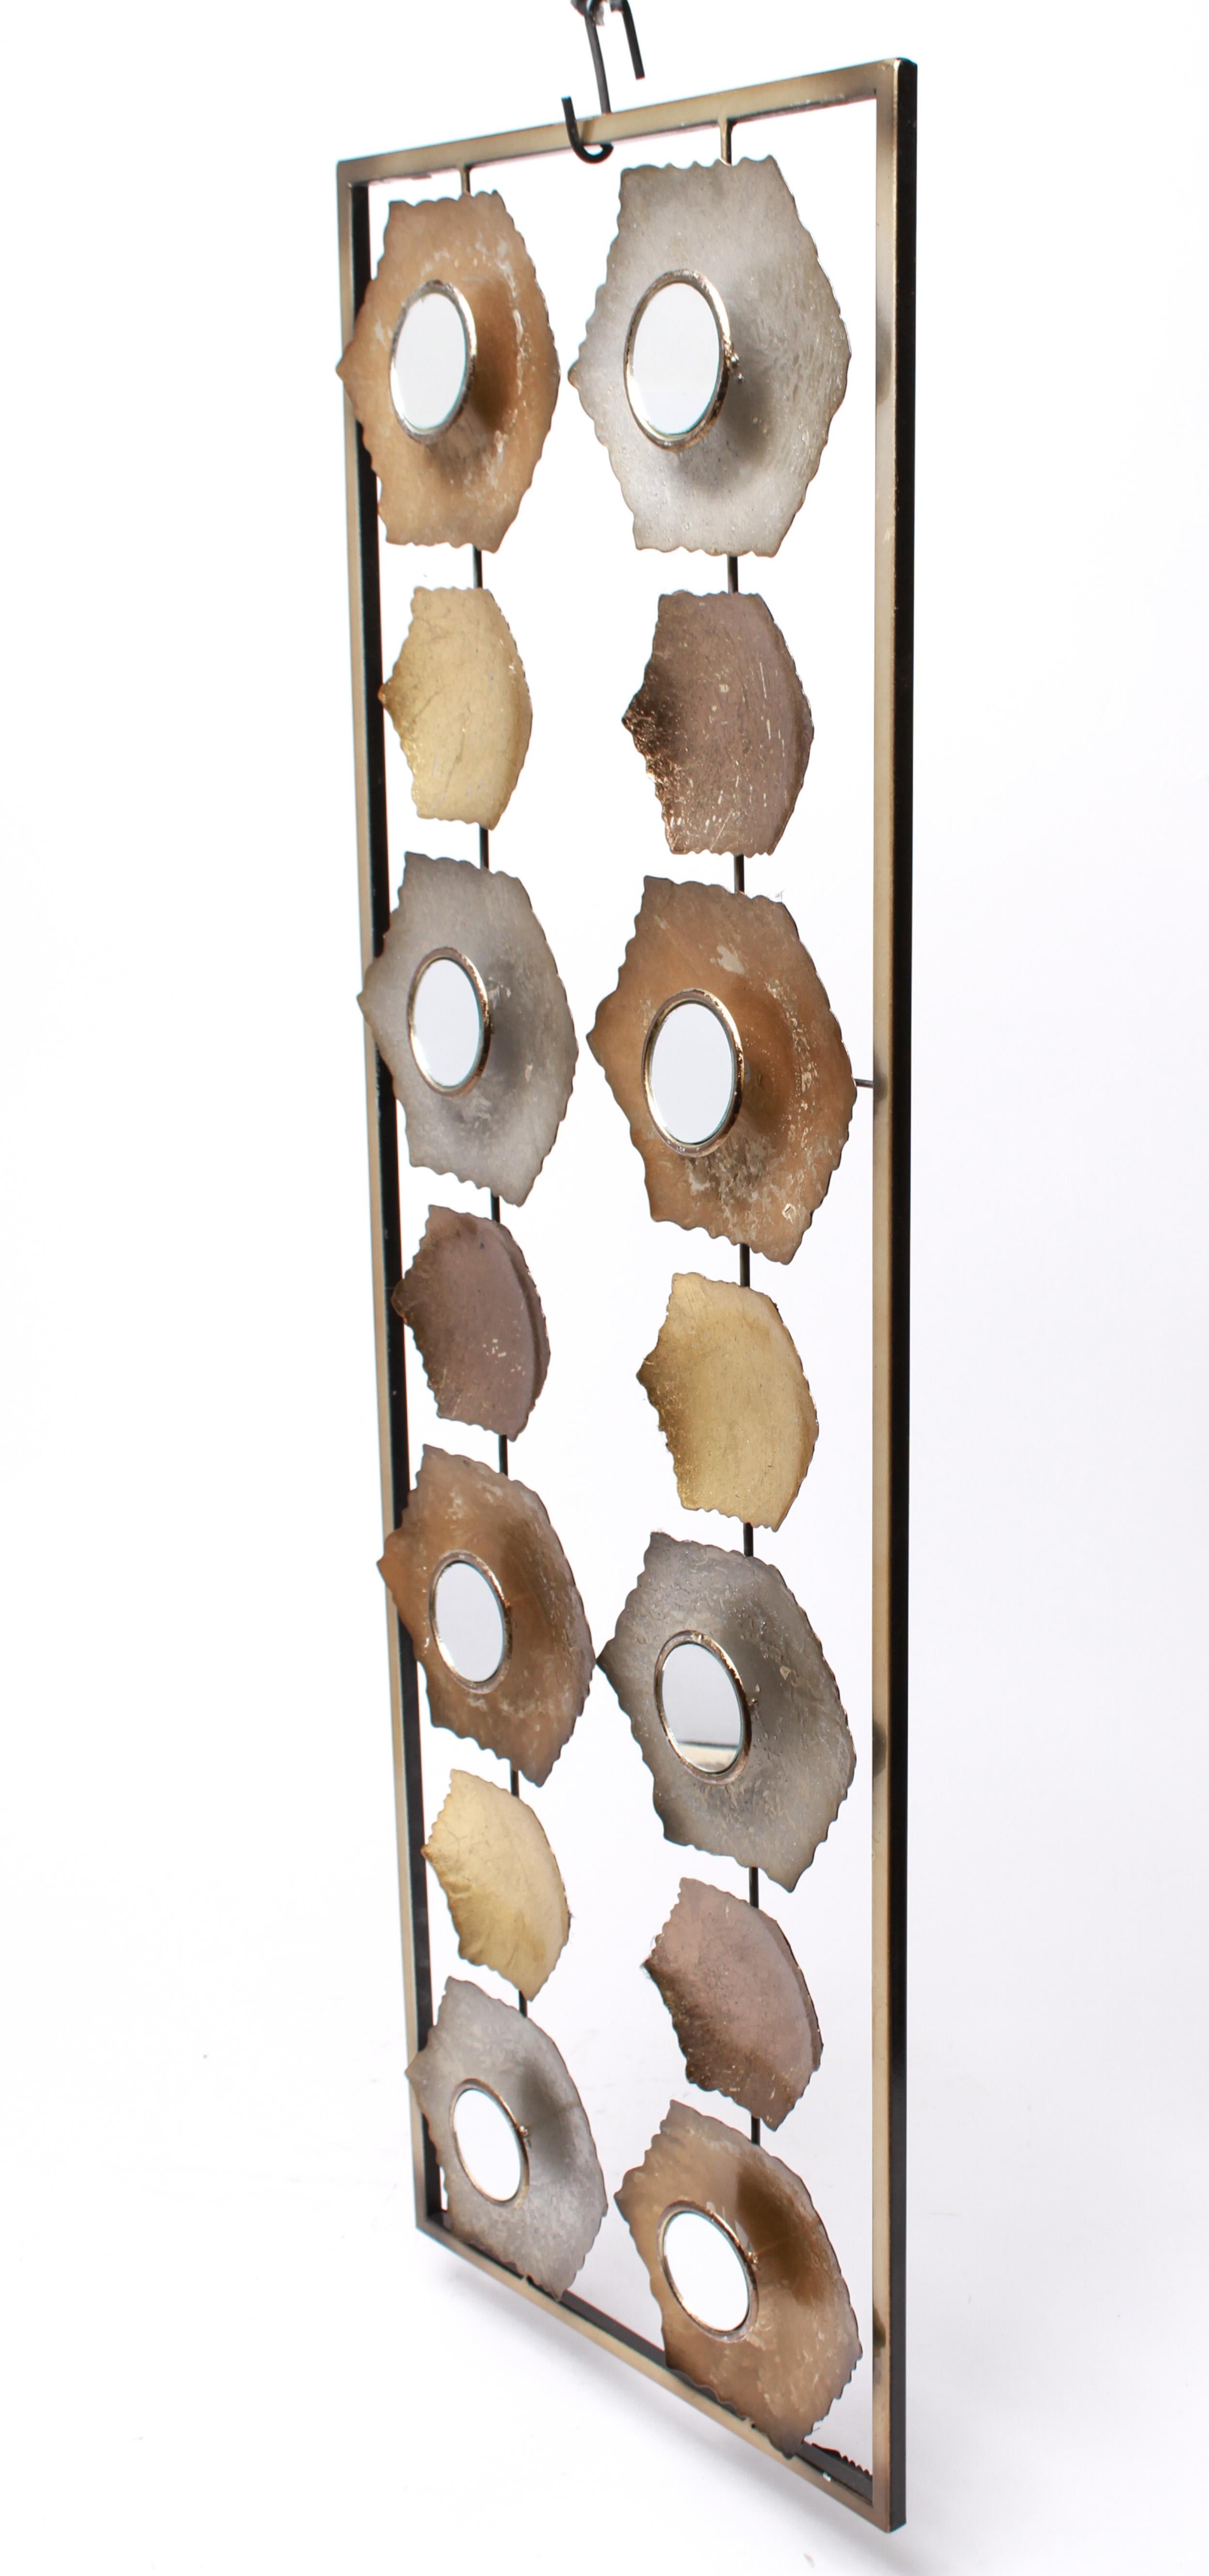 Modern metal wall sculpture composed of two columns of hexagons, several with round mirrored panel inserts. The piece is in great vintage condition with age-appropriate wear and use.